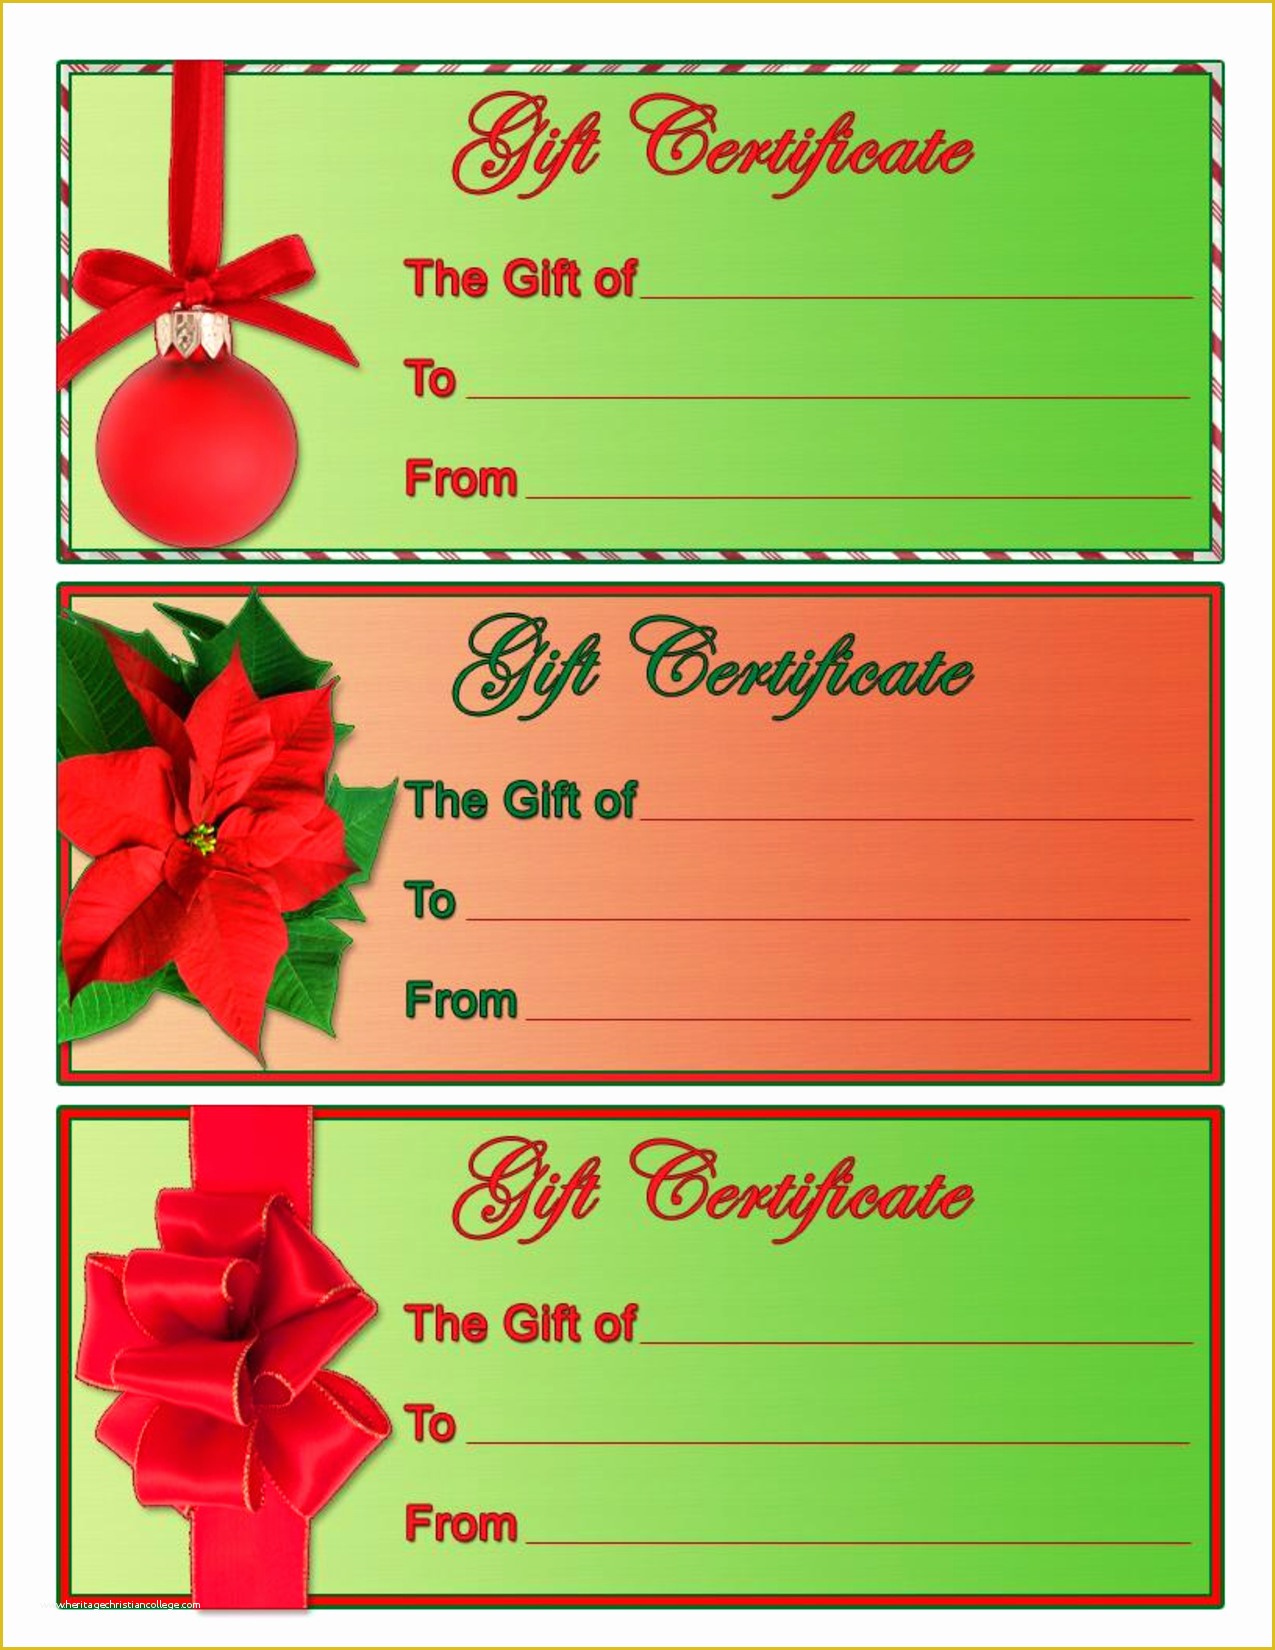 Gift Certificate Template Word20